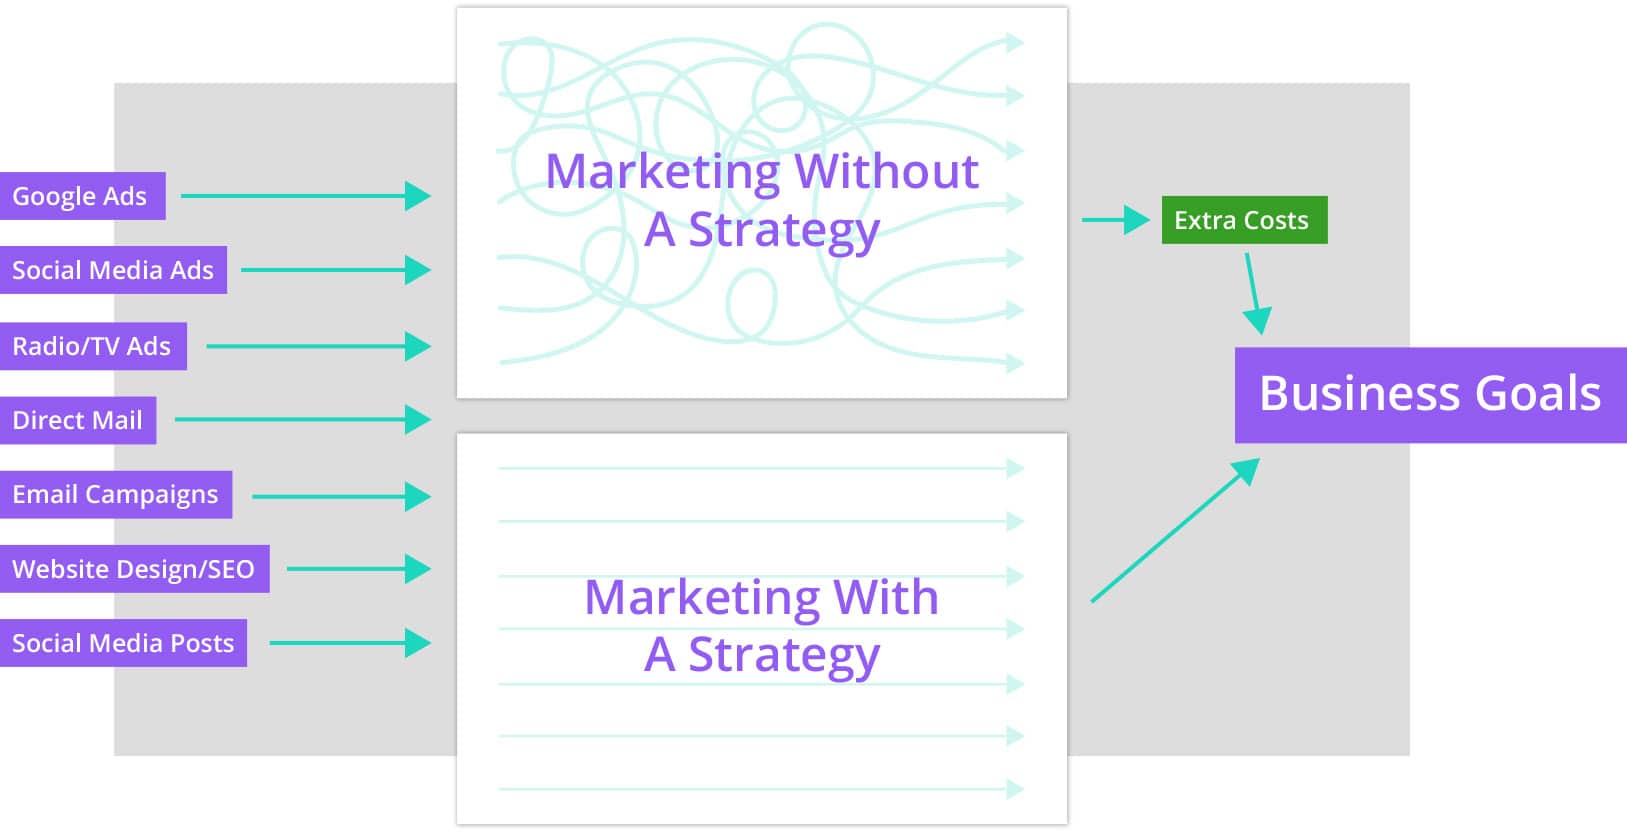 Marketing With and Without a Strategy